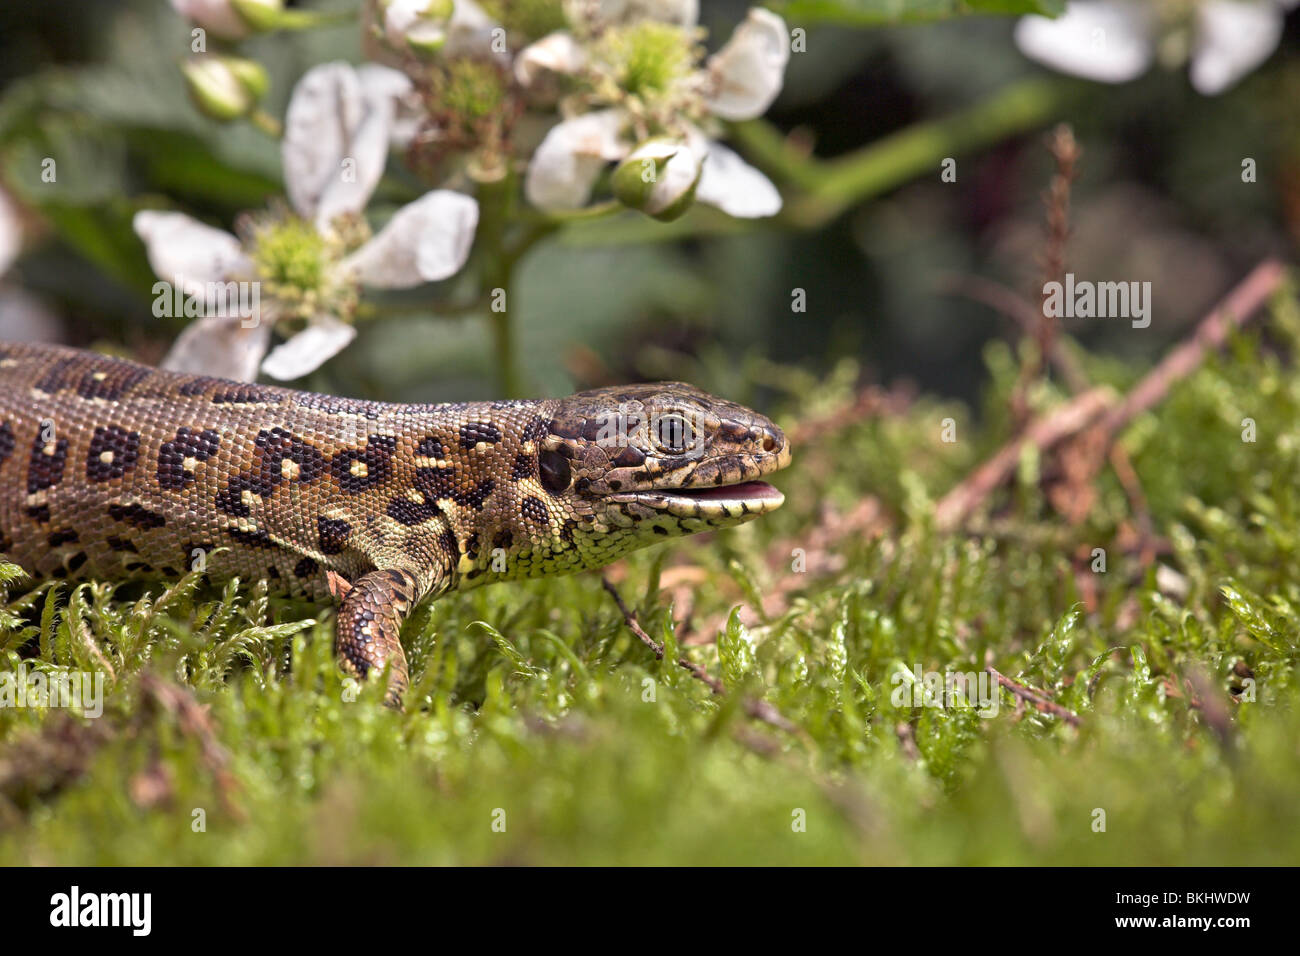 photo of a female sand lizard with her mouth opened under the flowering bramble Stock Photo